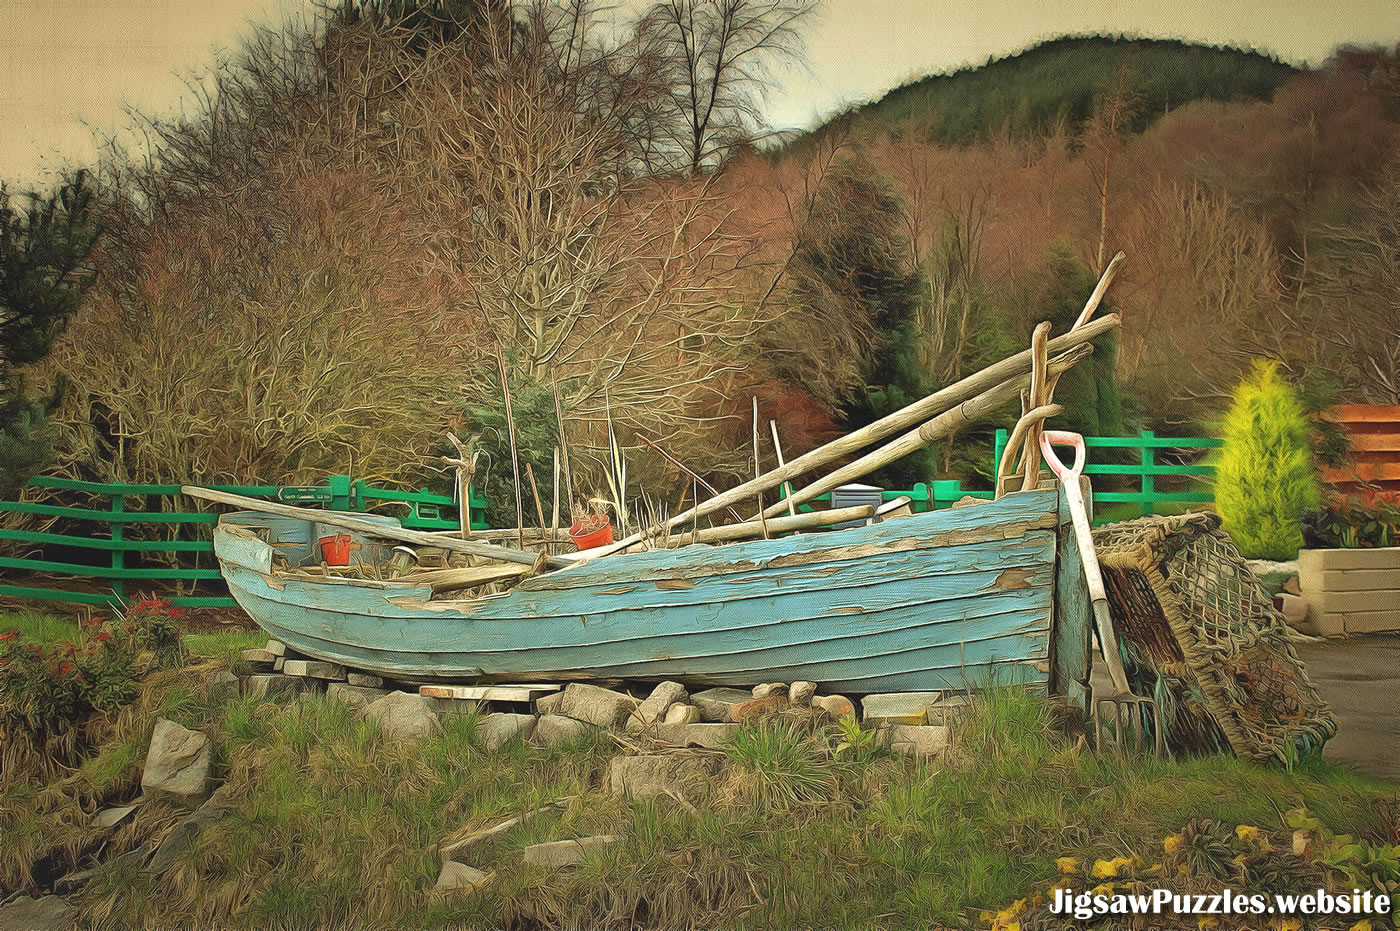 Old wooden fishing boat in a garden